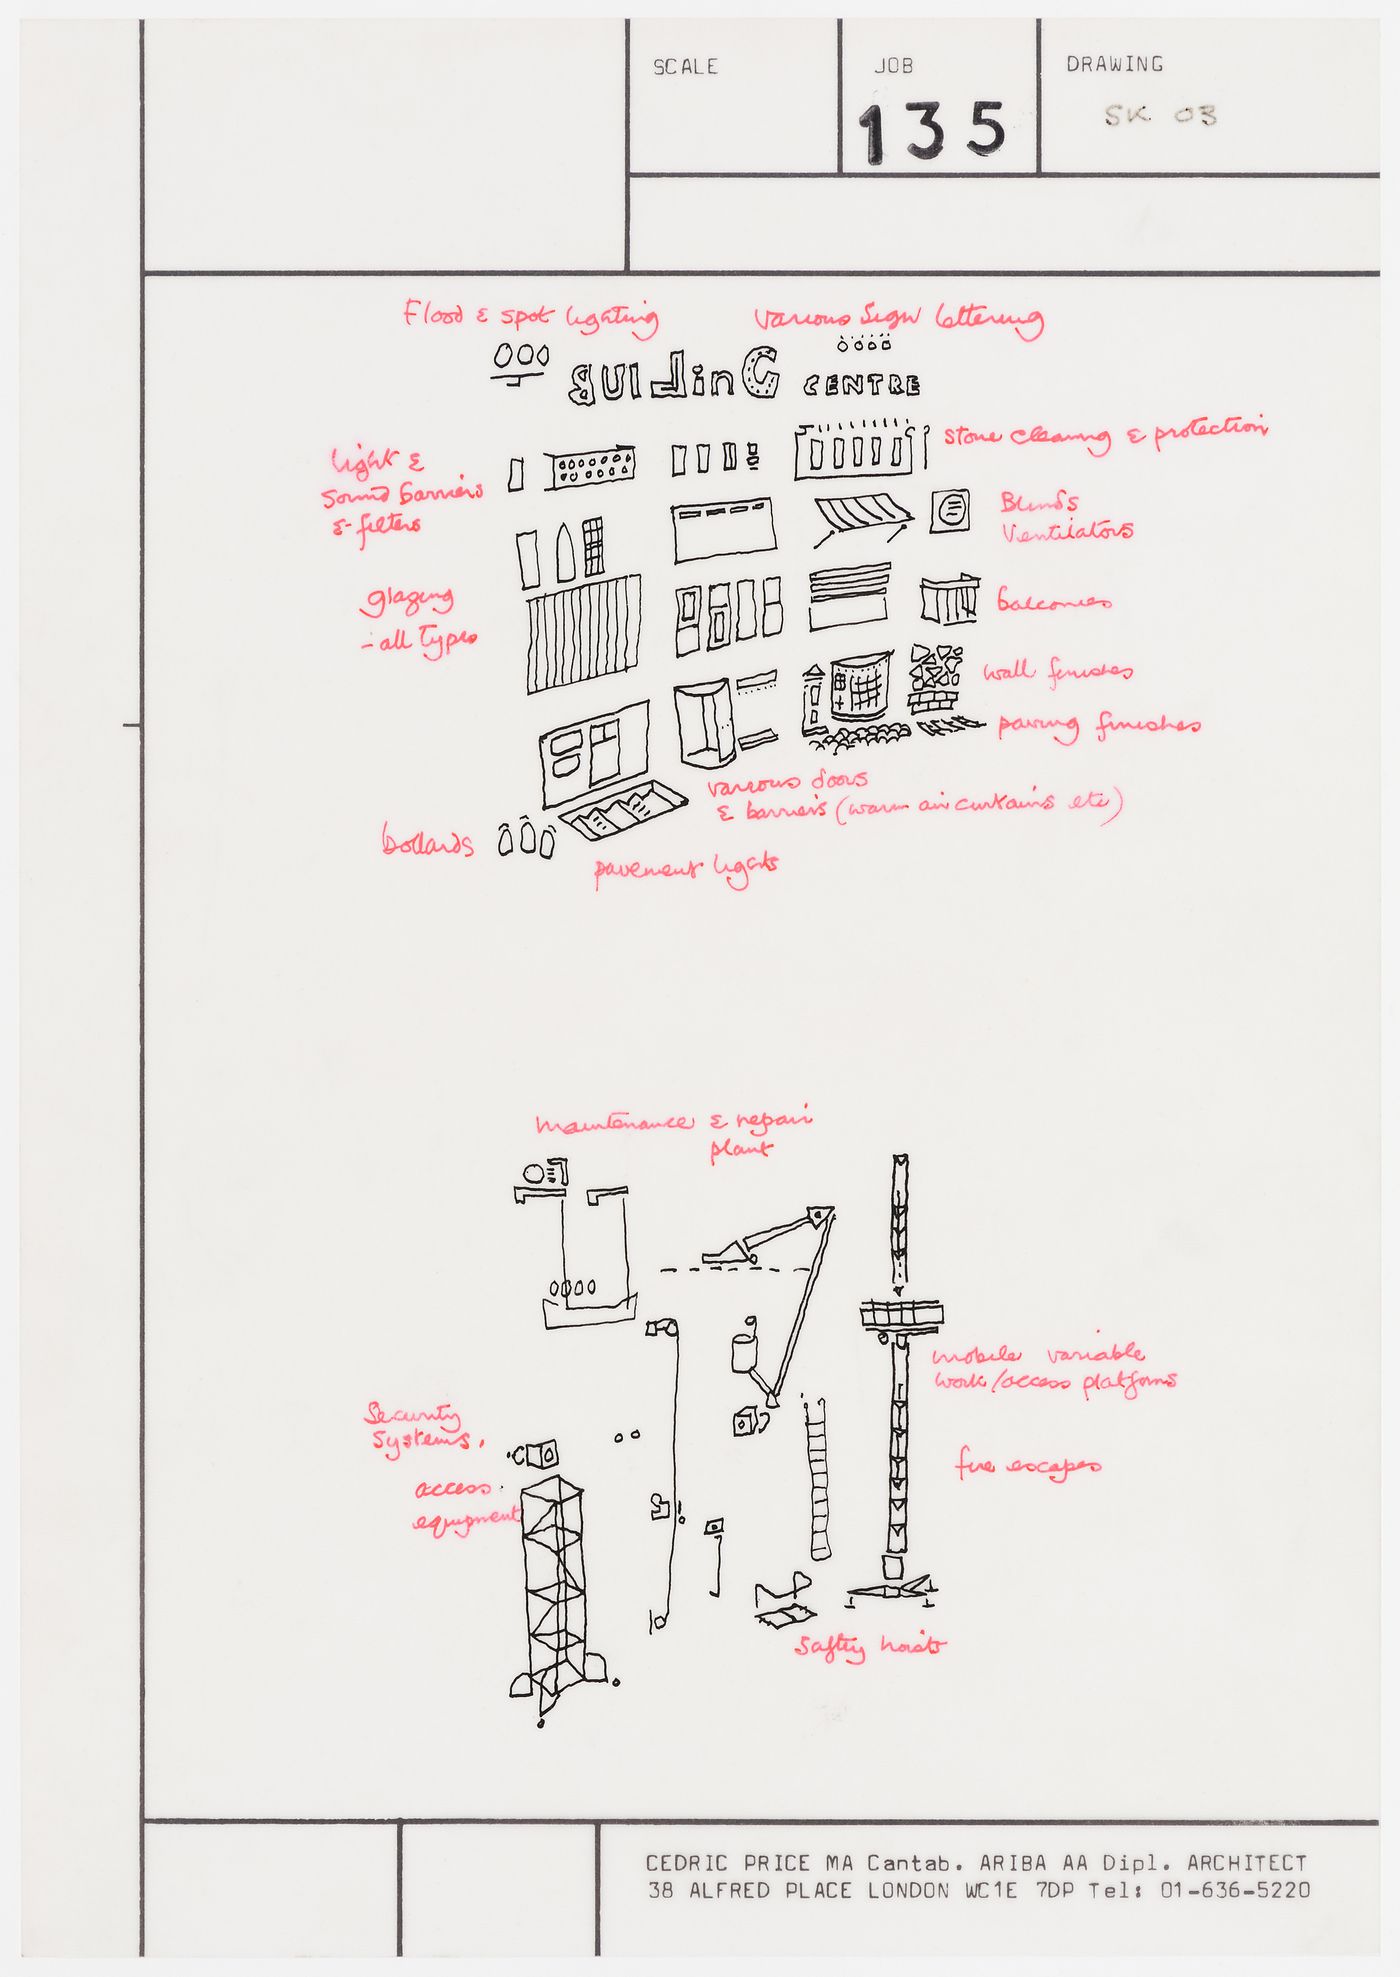 Facelift (ideas competition for the Building Centre, London, England): entry by Cedric Price: sketches of façade elements and equipment for maintenance, repair, access and security